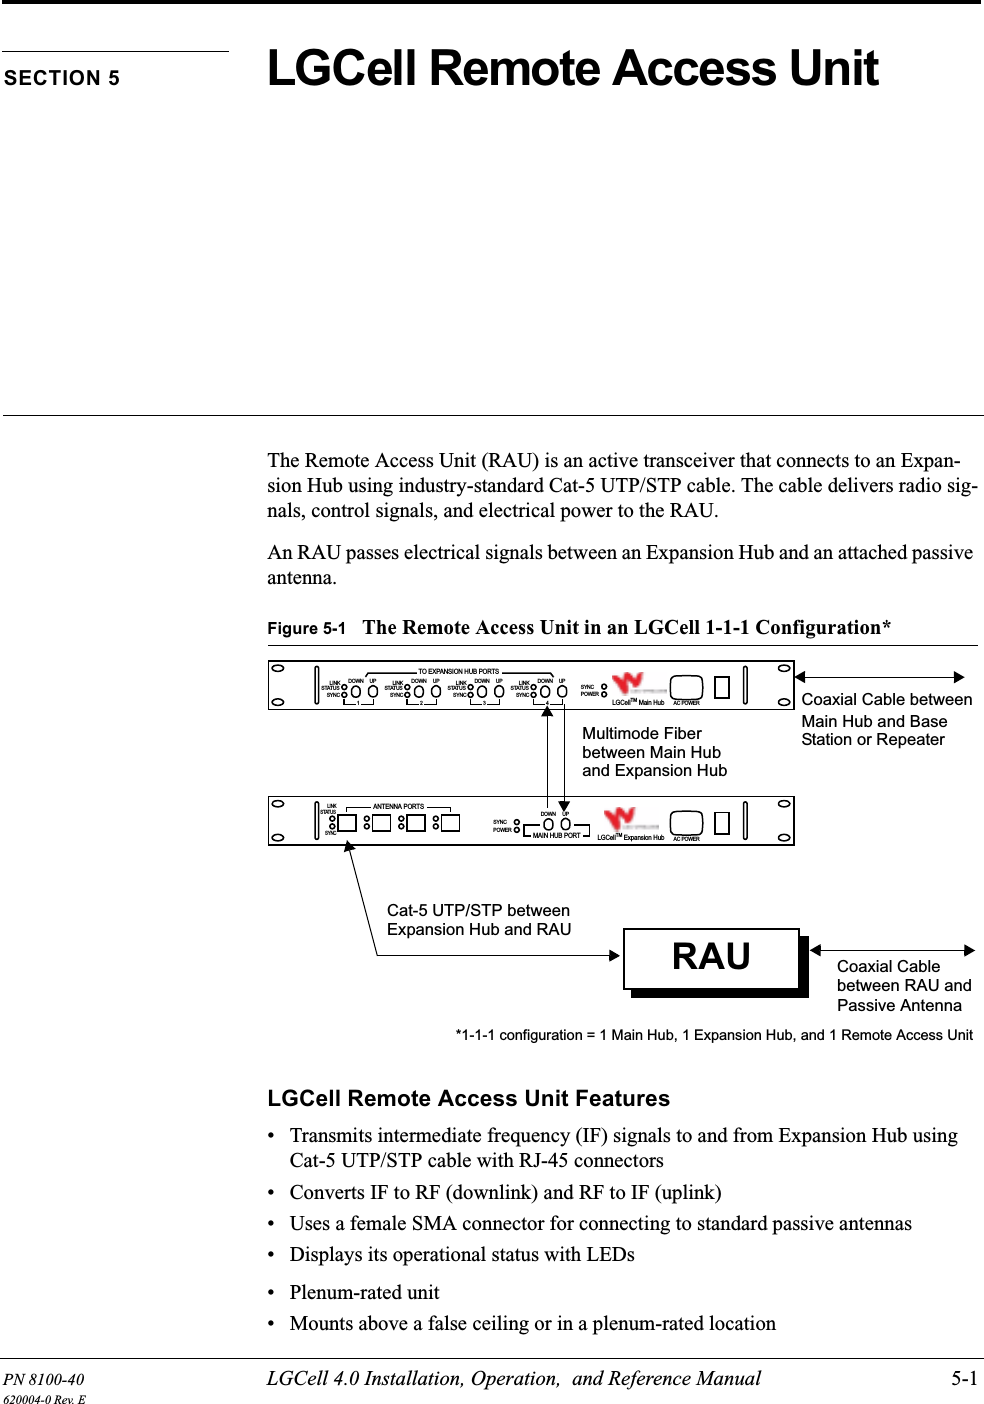 PN 8100-40 LGCell 4.0 Installation, Operation,  and Reference Manual 5-1620004-0 Rev. ESECTION 5 LGCell Remote Access UnitThe Remote Access Unit (RAU) is an active transceiver that connects to an Expan-sion Hub using industry-standard Cat-5 UTP/STP cable. The cable delivers radio sig-nals, control signals, and electrical power to the RAU.An RAU passes electrical signals between an Expansion Hub and an attached passive antenna.Figure 5-1 The Remote Access Unit in an LGCell 1-1-1 Configuration* LGCell Remote Access Unit Features• Transmits intermediate frequency (IF) signals to and from Expansion Hub using Cat-5 UTP/STP cable with RJ-45 connectors• Converts IF to RF (downlink) and RF to IF (uplink)• Uses a female SMA connector for connecting to standard passive antennas• Displays its operational status with LEDs• Plenum-rated unit• Mounts above a false ceiling or in a plenum-rated locationRAUMultimode Fiberbetween Main Huband Expansion HubCat-5 UTP/STP betweenExpansion Hub and RAU Main Hub and Base Station or RepeaterCoaxial CableCoaxial Cable betweenAC POWERLGCellTM Main HubSYNCPOWERLINKSYNCSTATUSDOWN UP1LINKSYNCSTATUSDOWN UP2LINKSYNCSTATUSDOWN UP3LINKSYNCSTATUSDOWN UP4TO EXPANSION HUB PORTSAC POWERLGCellTM Expansion HubSYNCPOWERSYNCLINKSTATUSANTENNA PORTSDOWN UPMAIN HUB PORTbetween RAU andPassive Antenna*1-1-1 configuration = 1 Main Hub, 1 Expansion Hub, and 1 Remote Access Unit